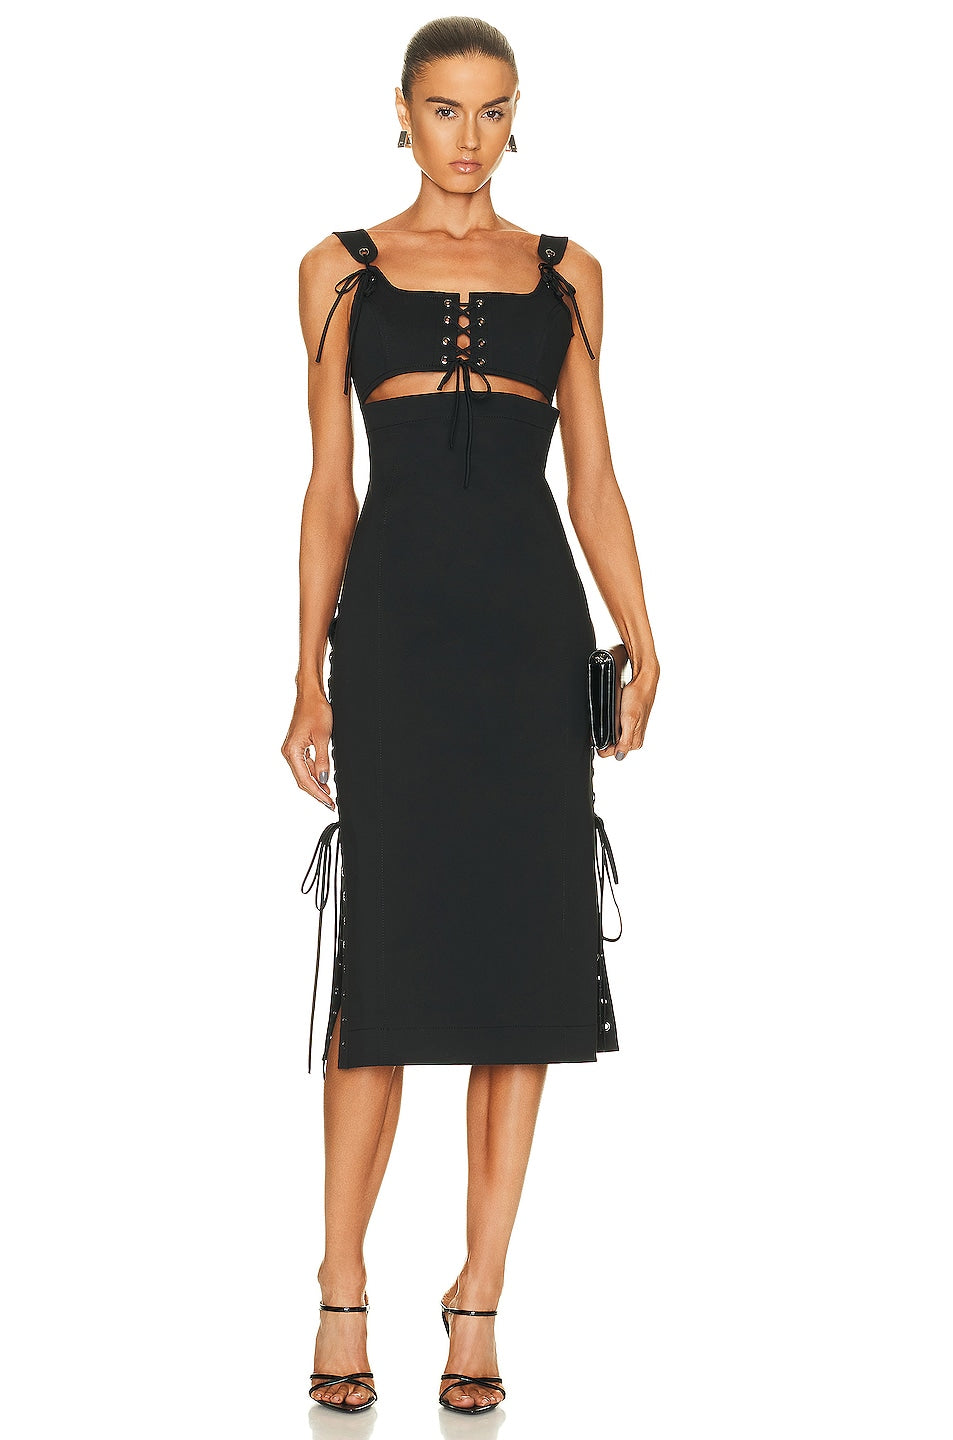 Monse Laced Detail Dress in Black -NEW WITH TAGS SIZE 8